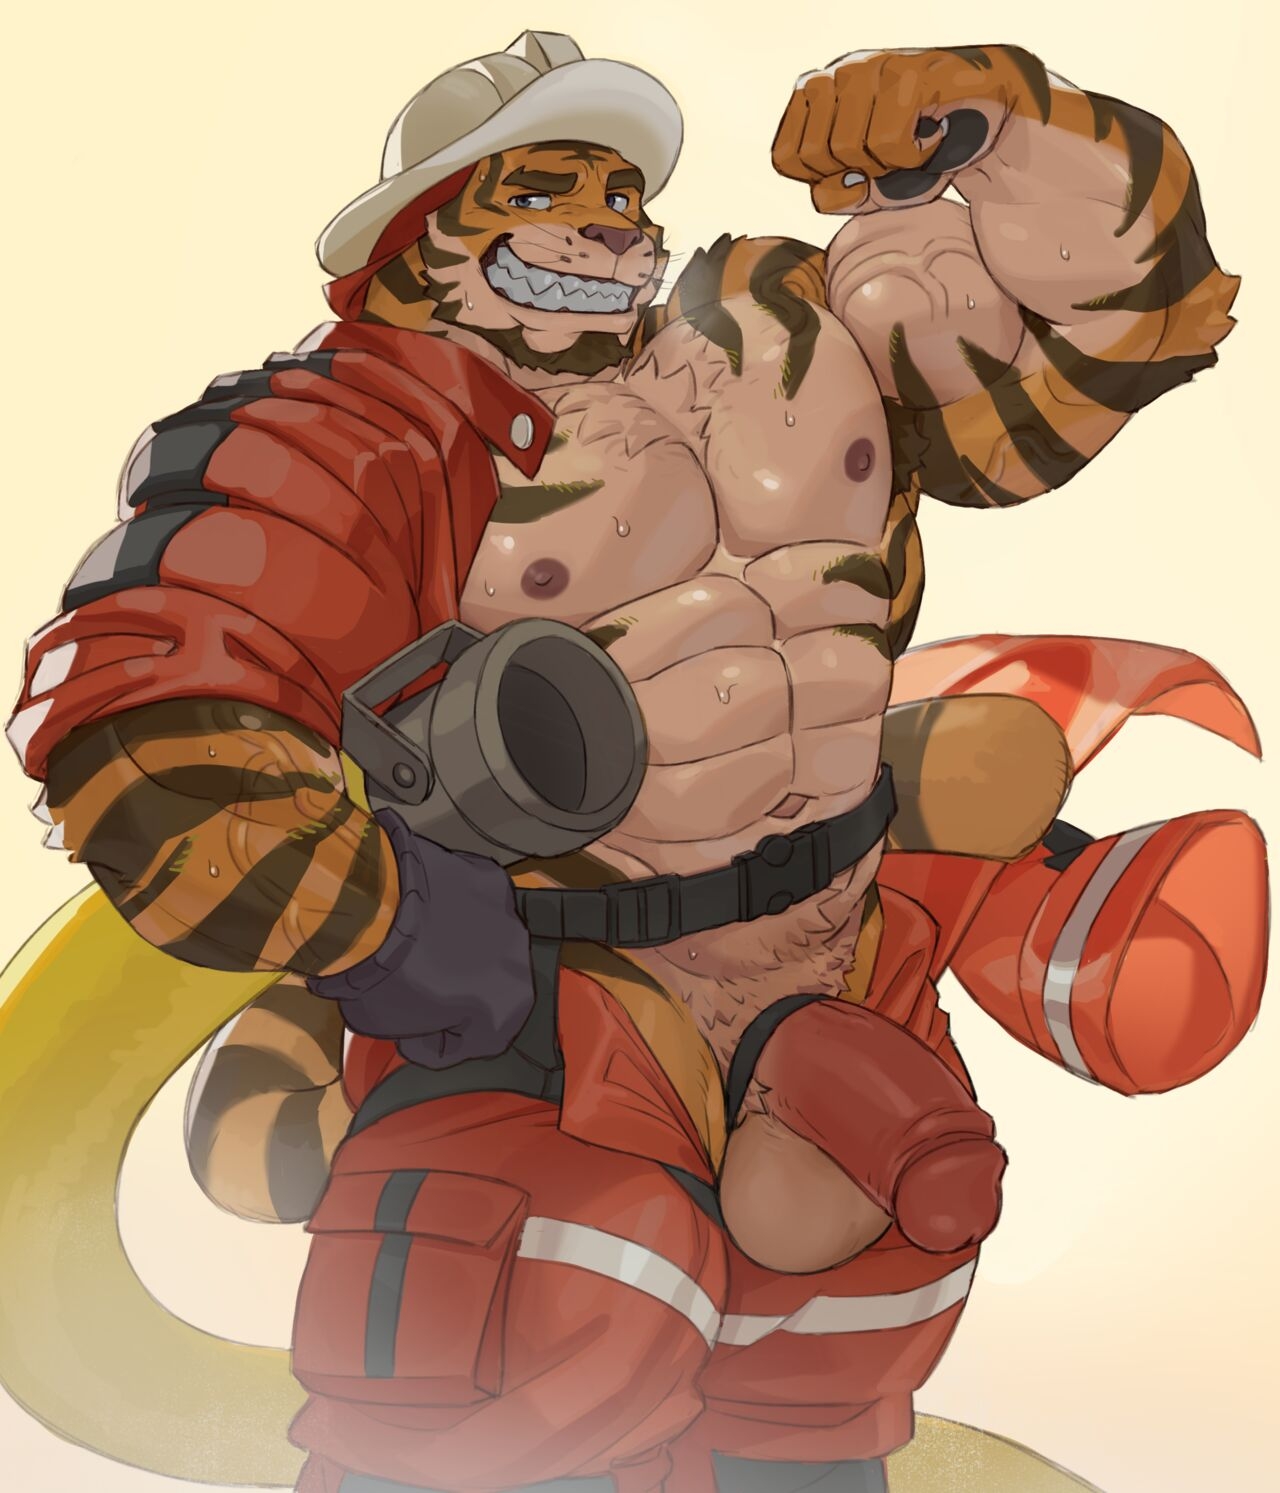 [Imatoart] Tiger Fire Chief's Training Session | 老虎消防队长的训练时间! [Chinese][Translated by Chrome Heart Tags] 35